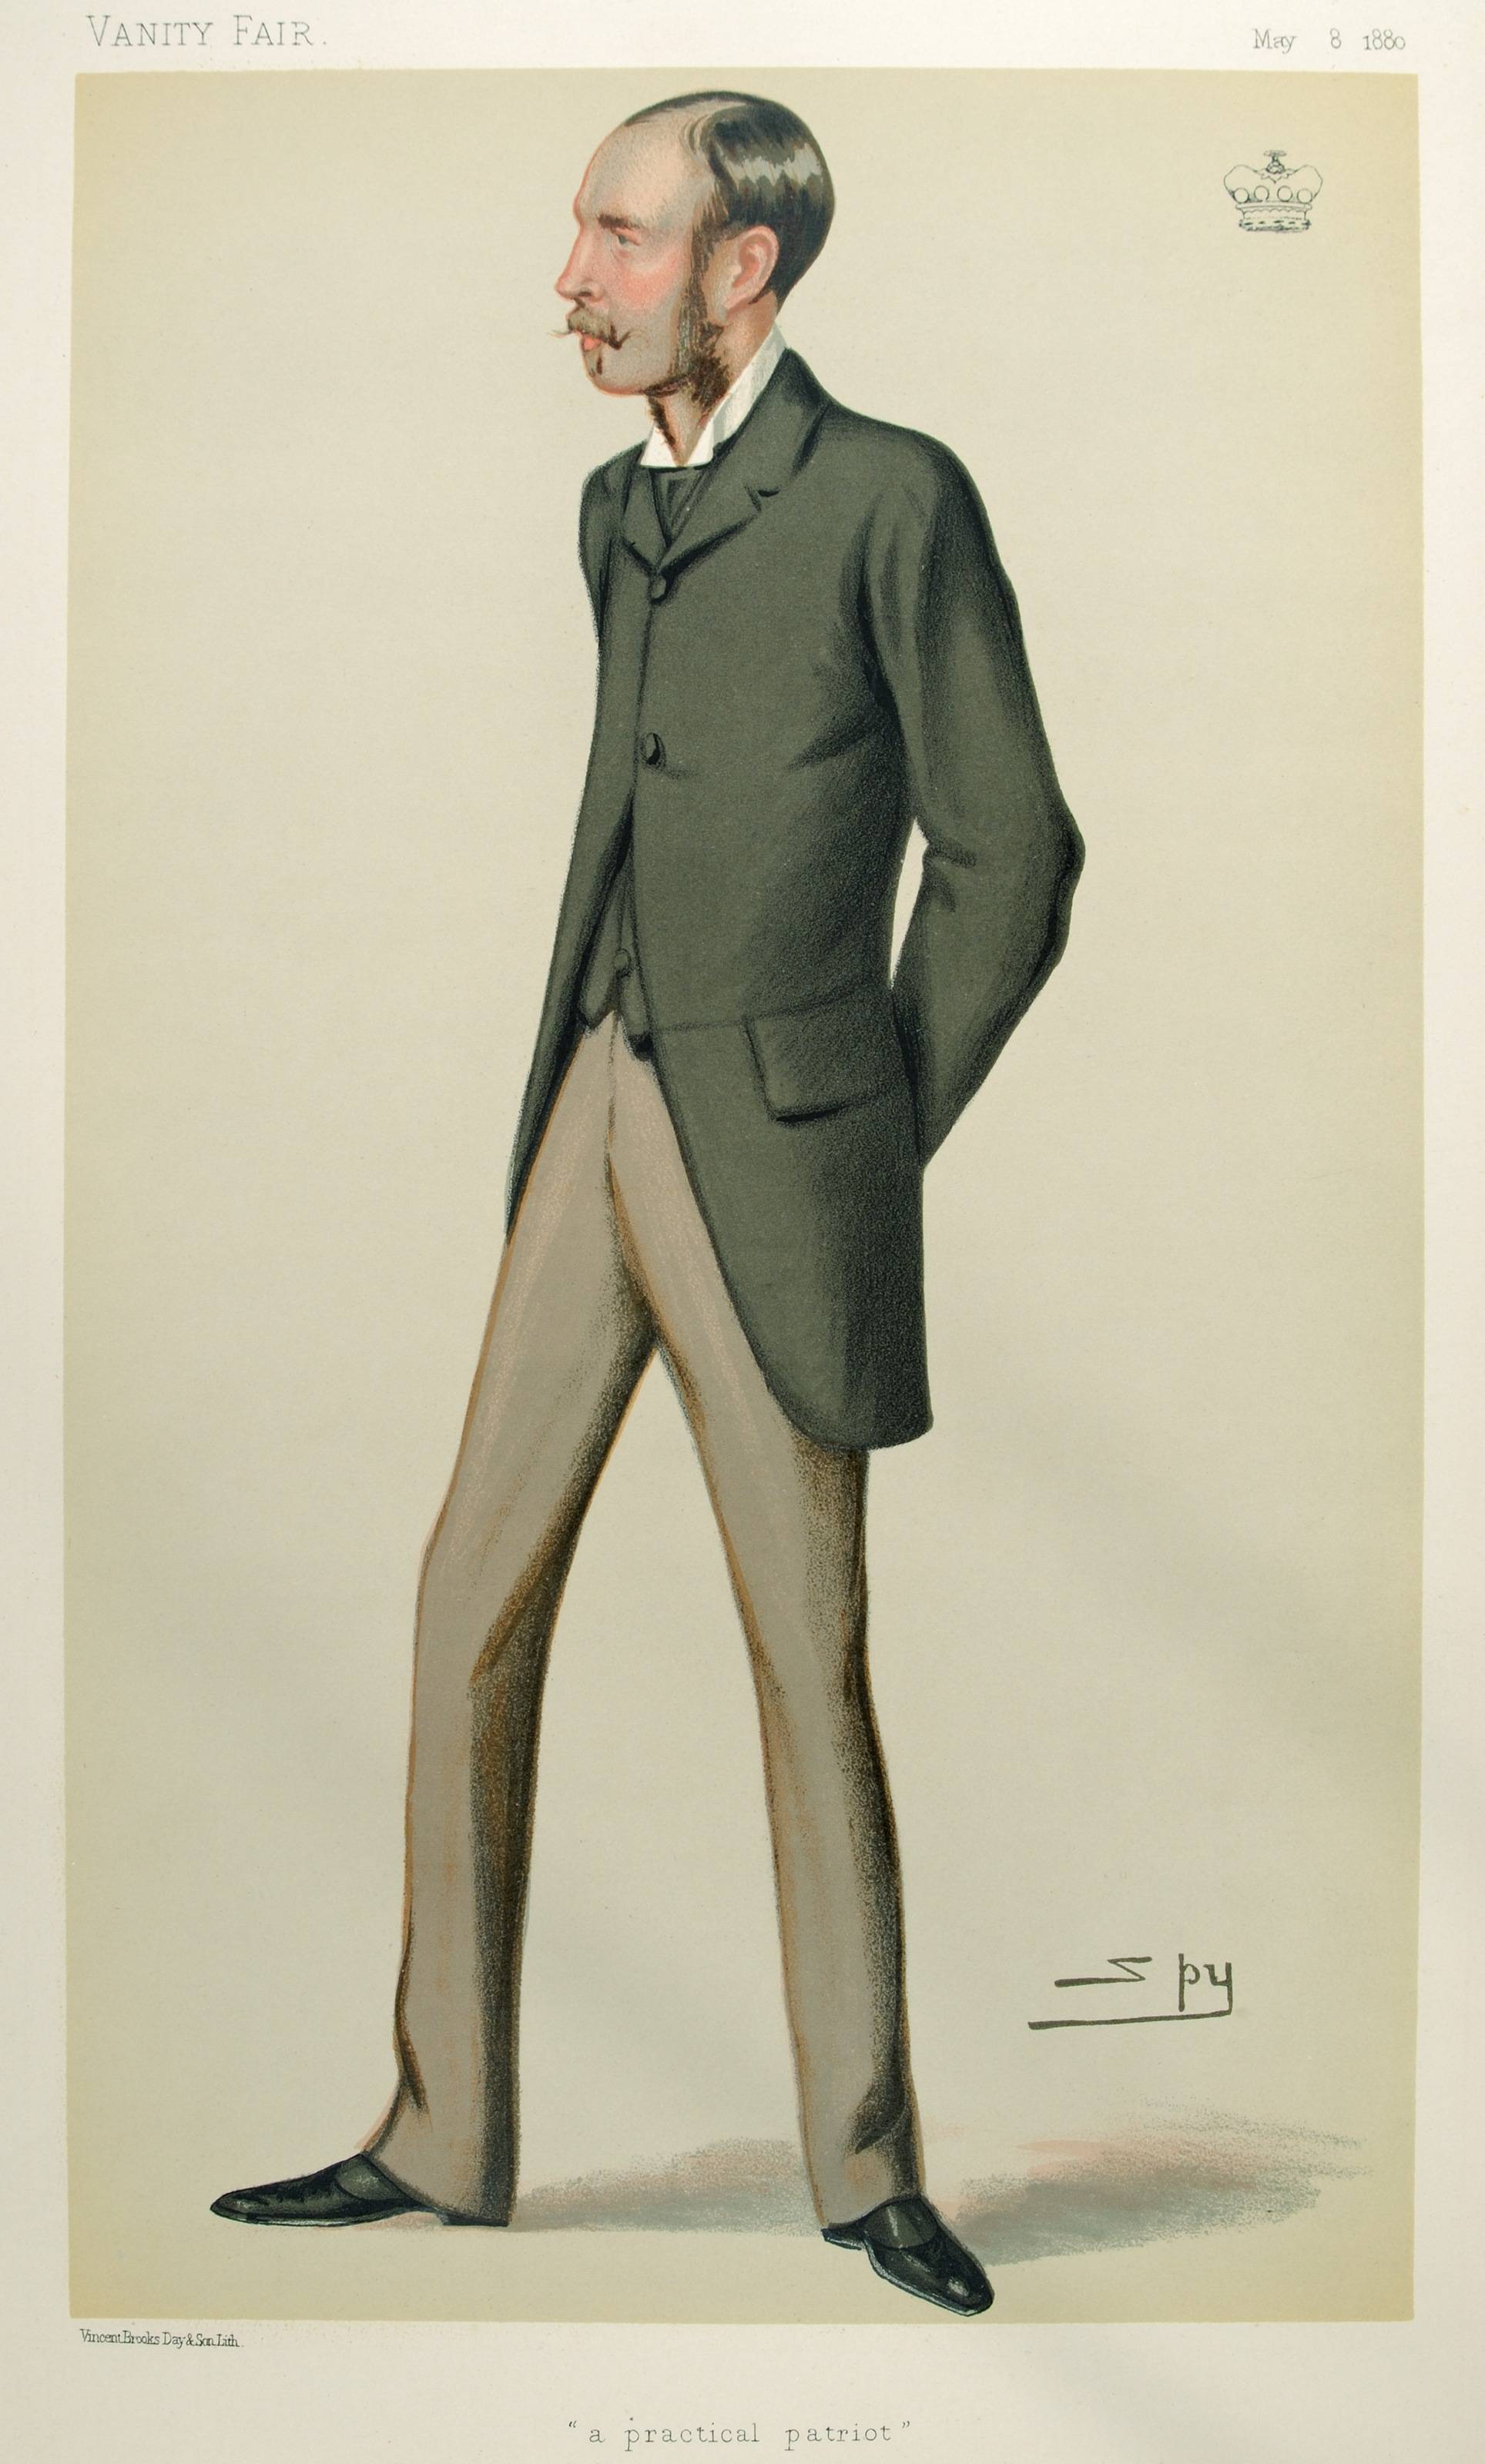 A caricature of the Baron published in Vanity Fair in 1880. Public domain.